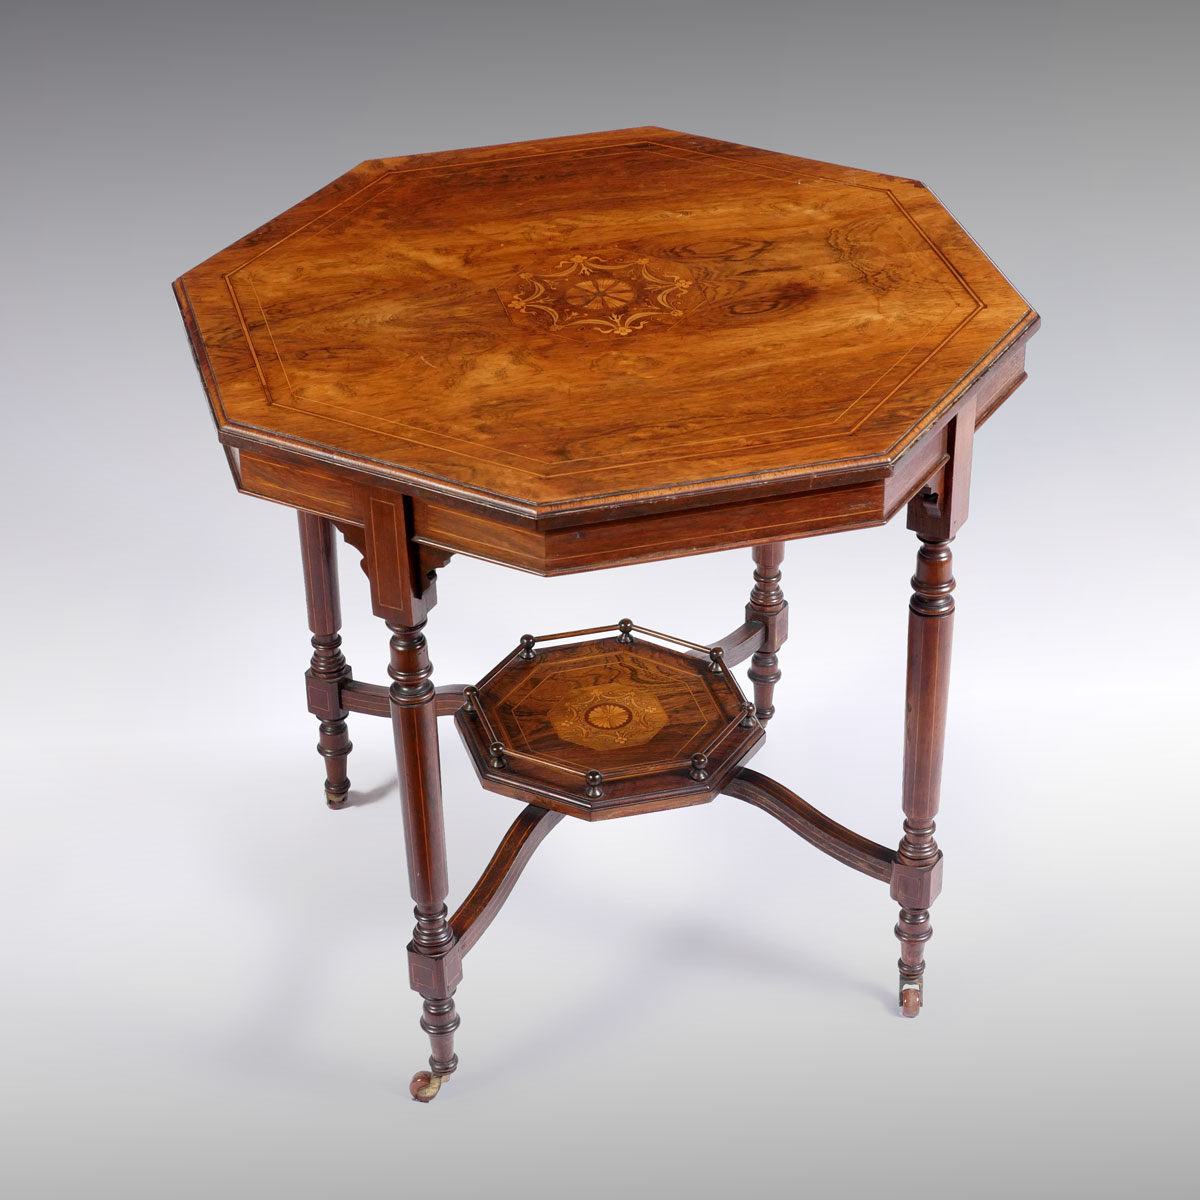 2 TIERED OCTAGONAL INLAID TABLE  27395b